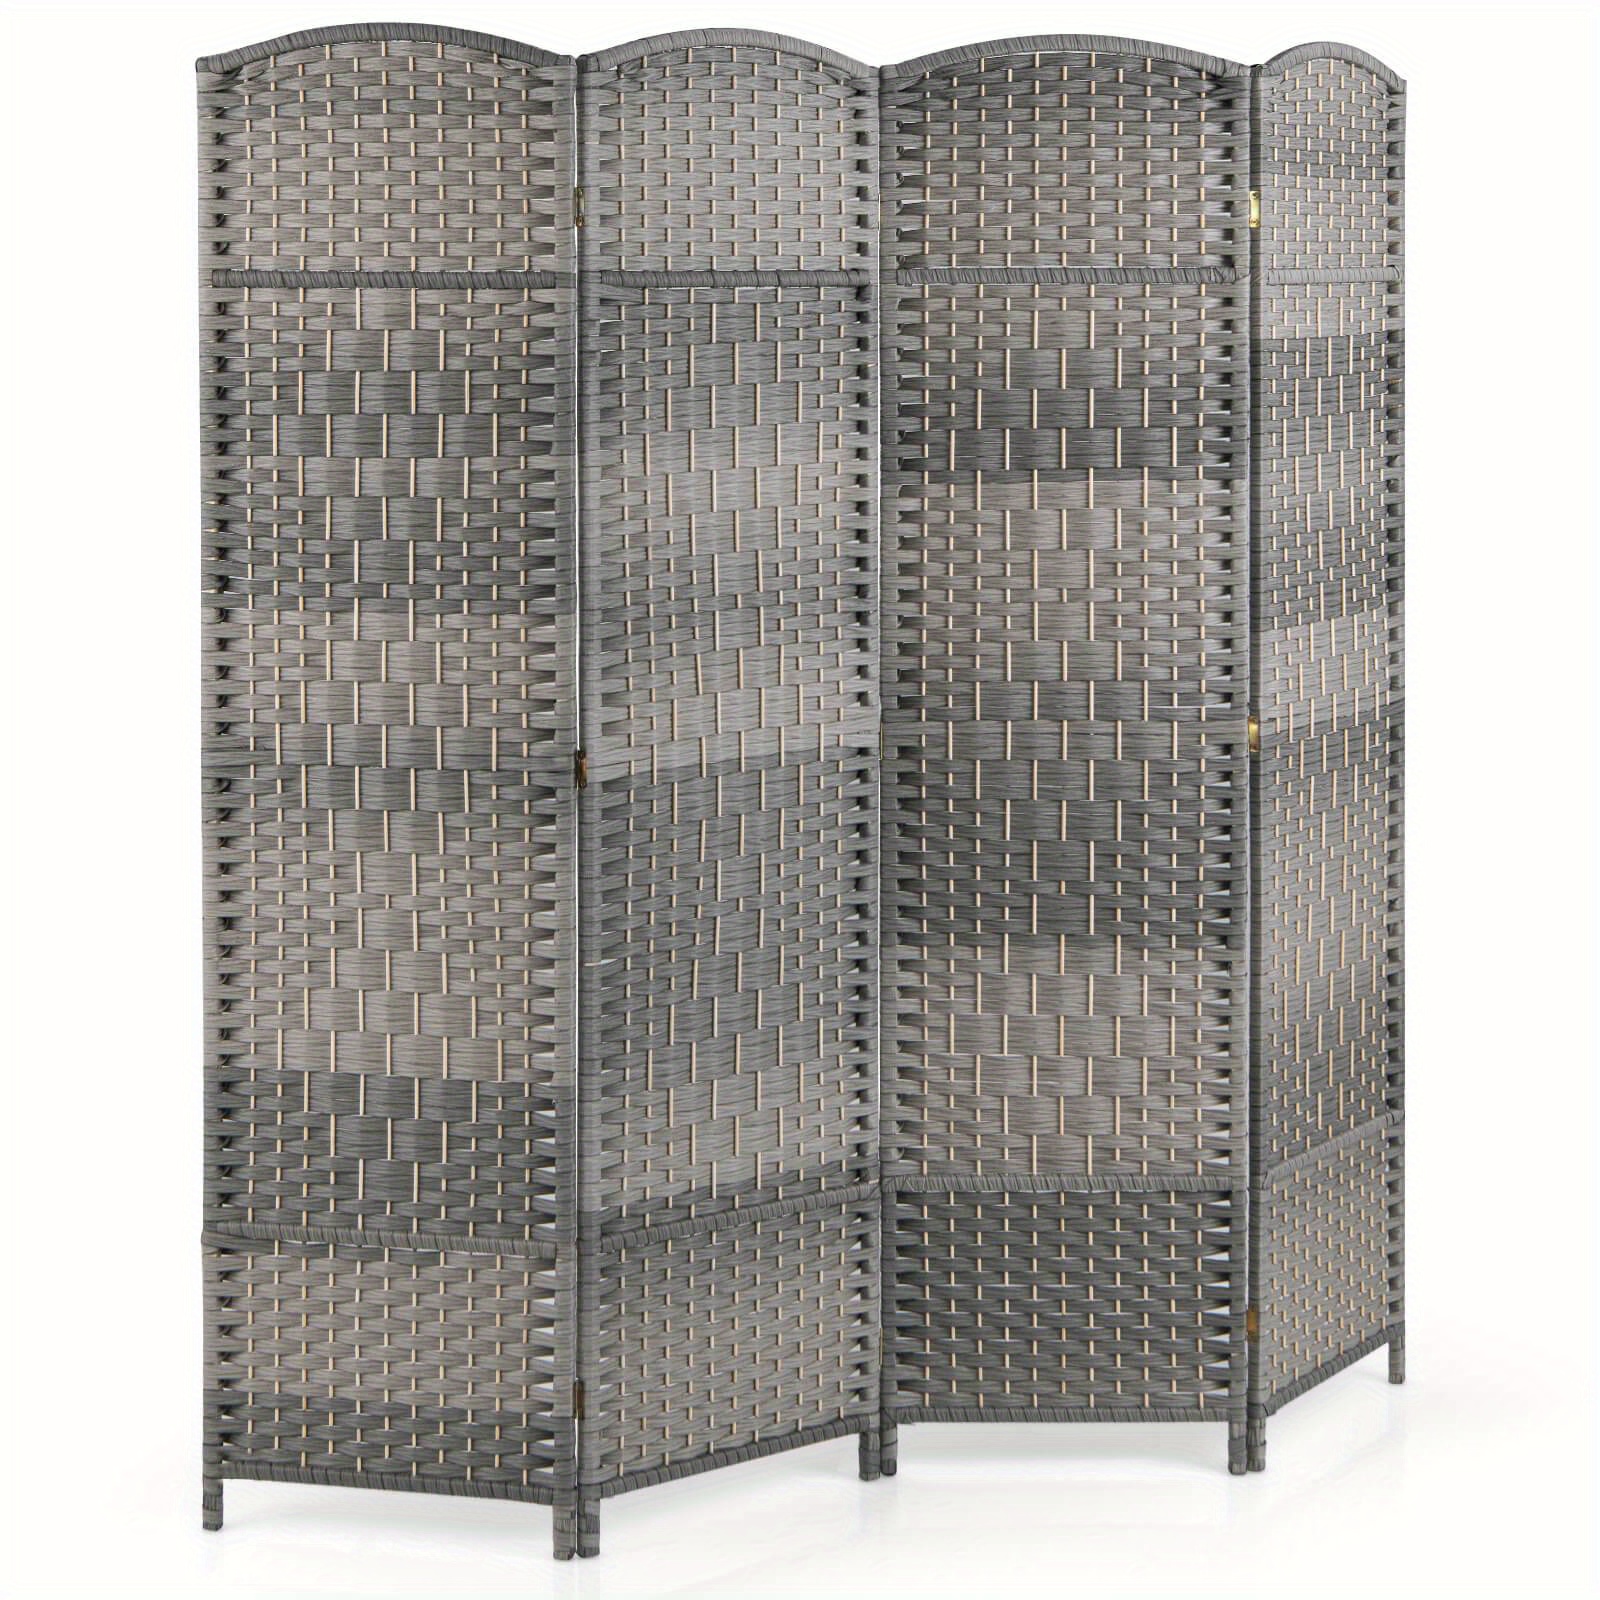 

Lifezeal 4-panel Folding Privacy Screen Room Divider W/ Hand-woven Pattern For Home